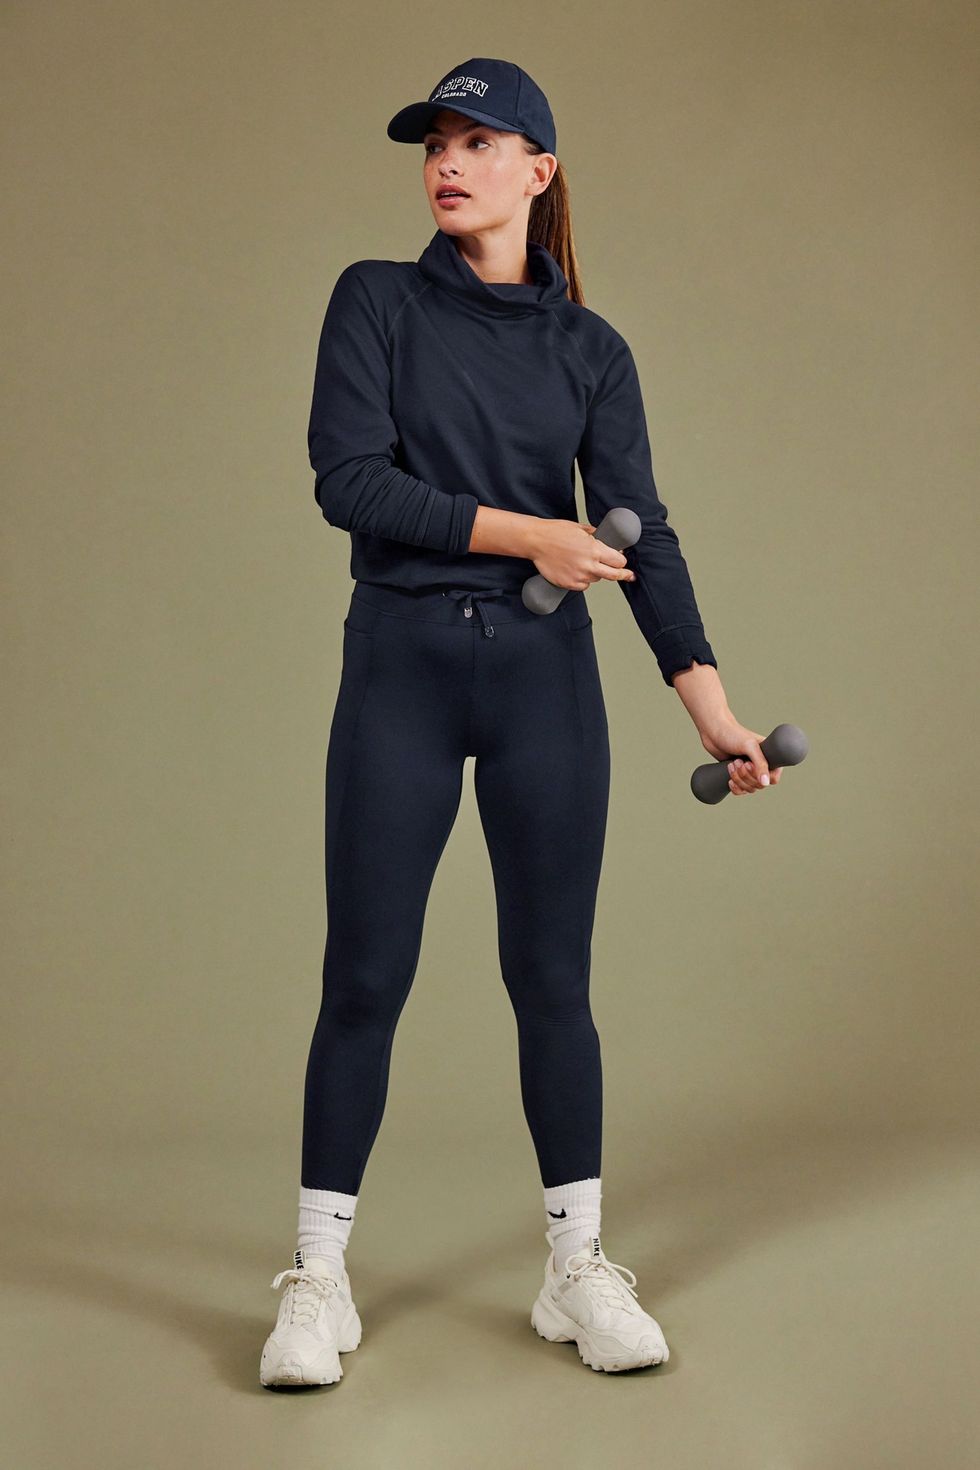 15 Fleece lined leggings for chilly winter workouts 2024